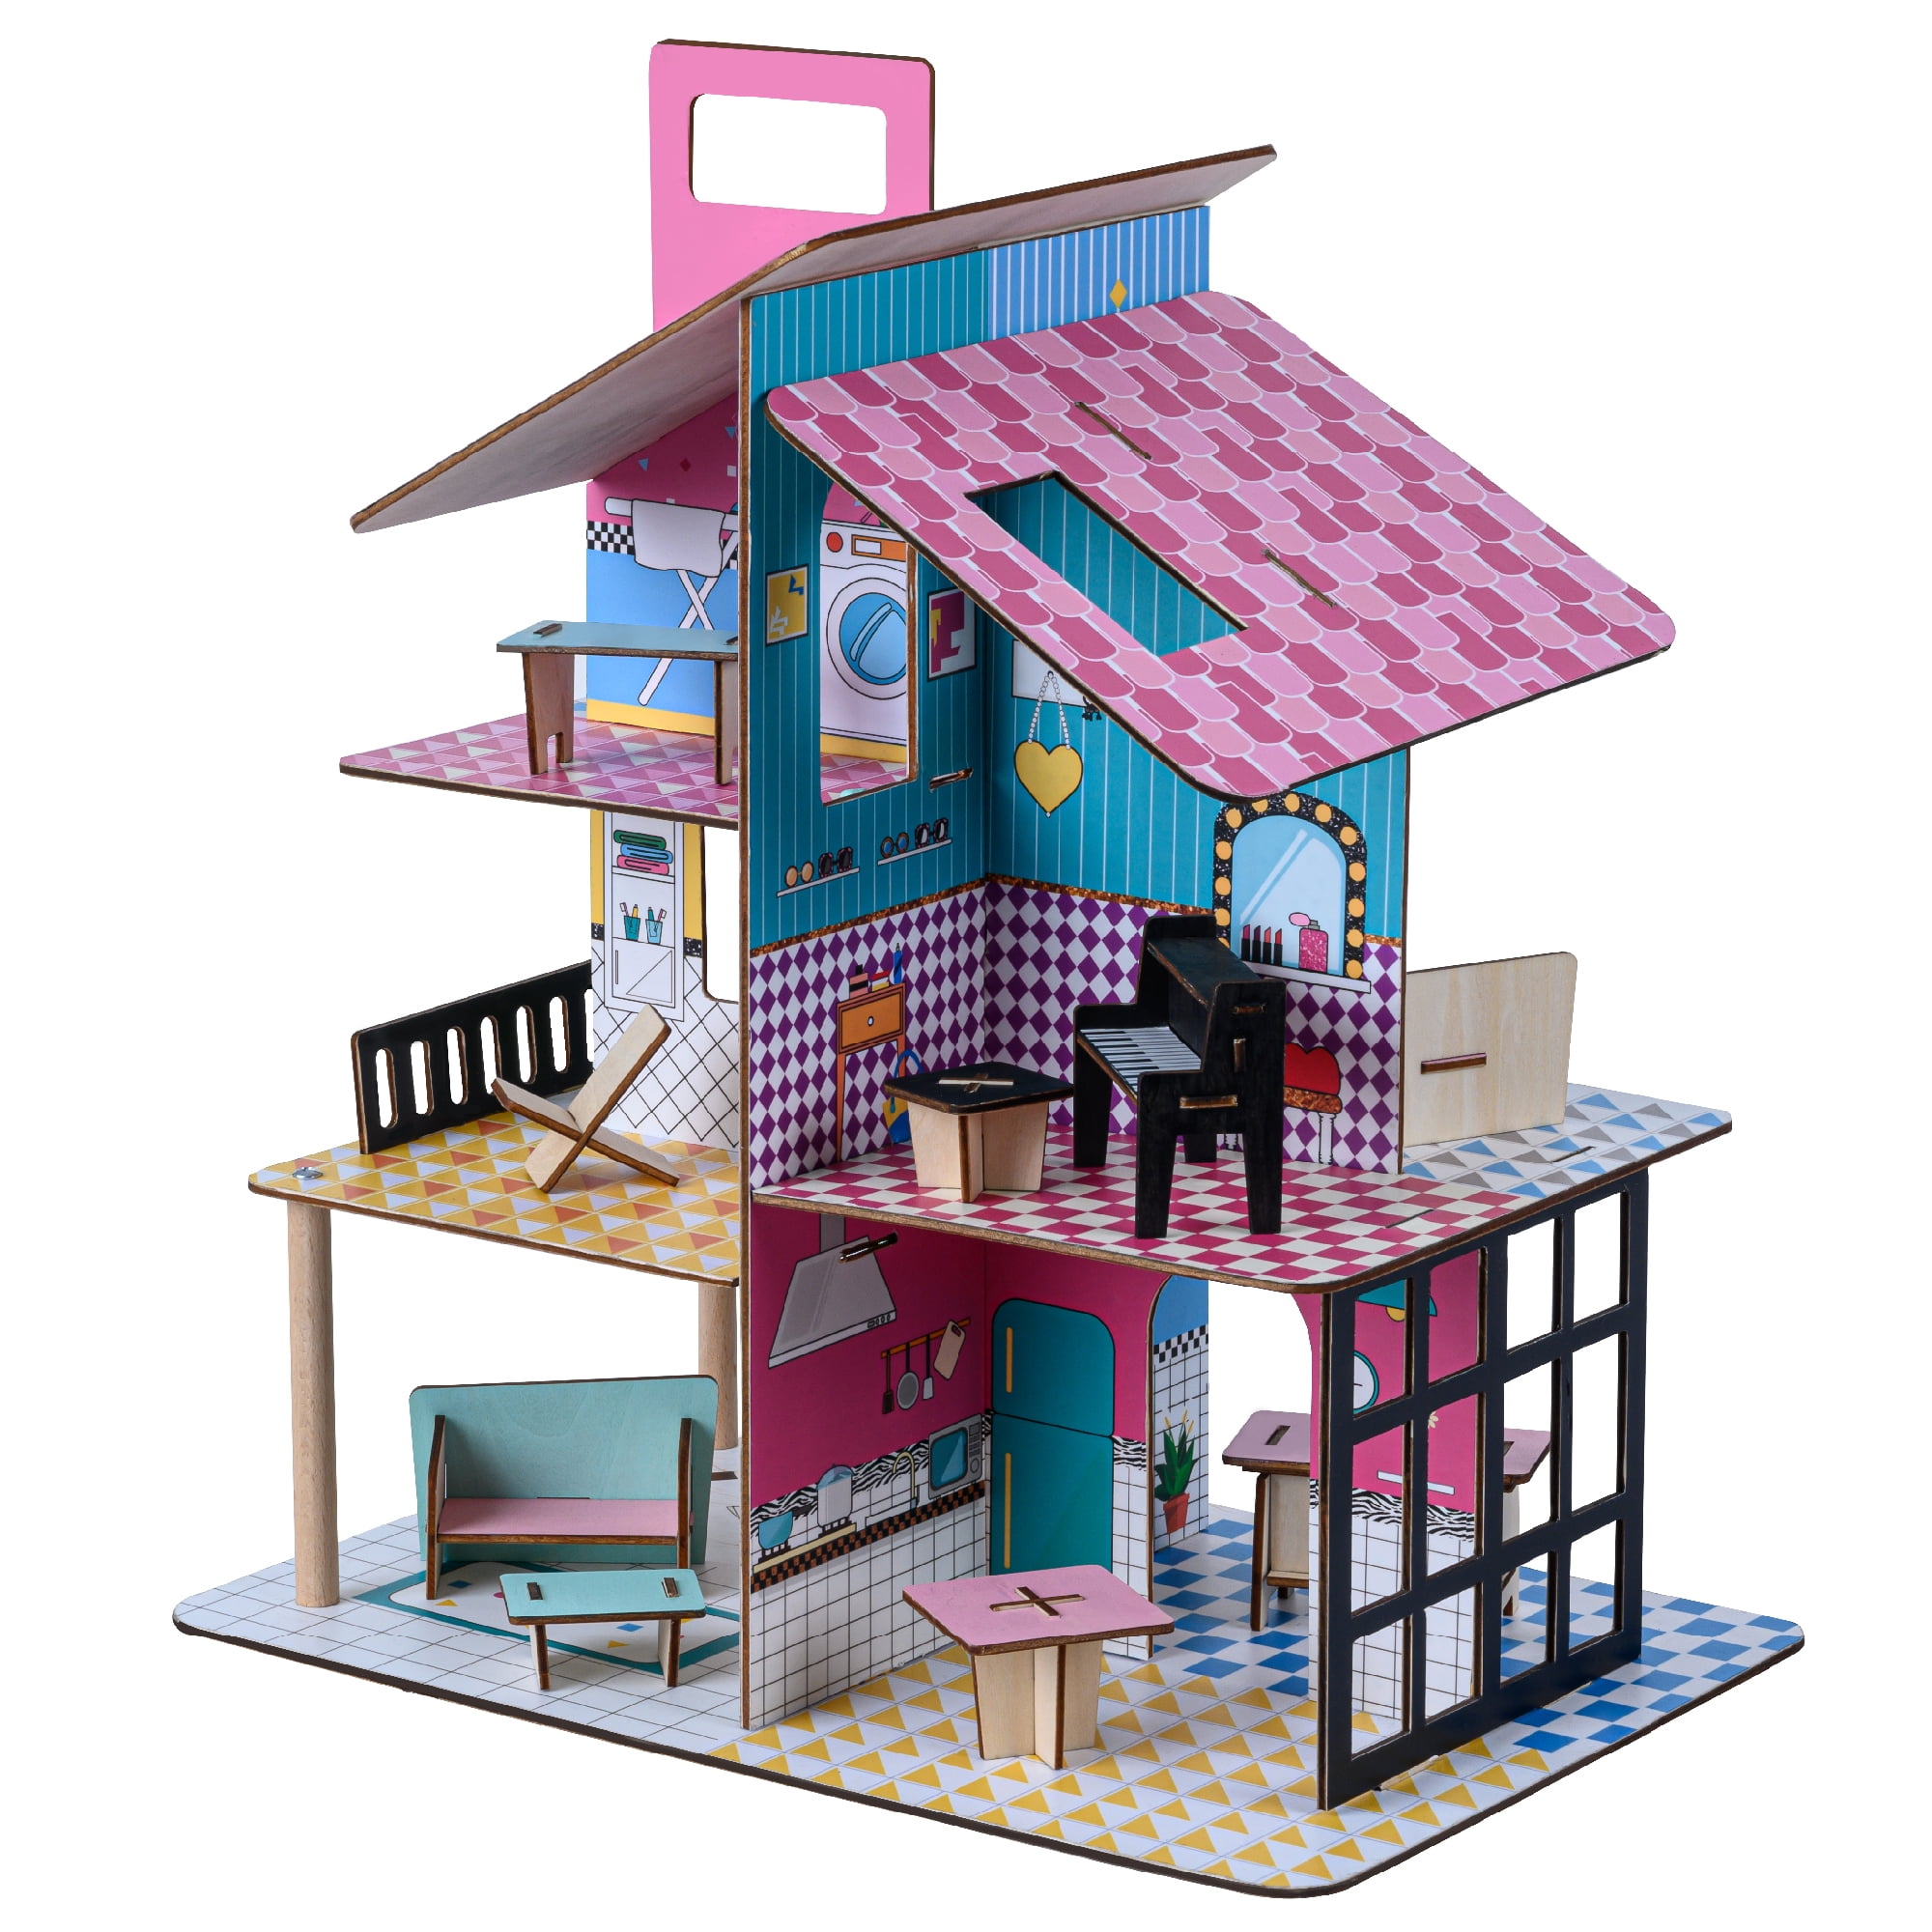 The Art Deco Dollhouse - Mansions